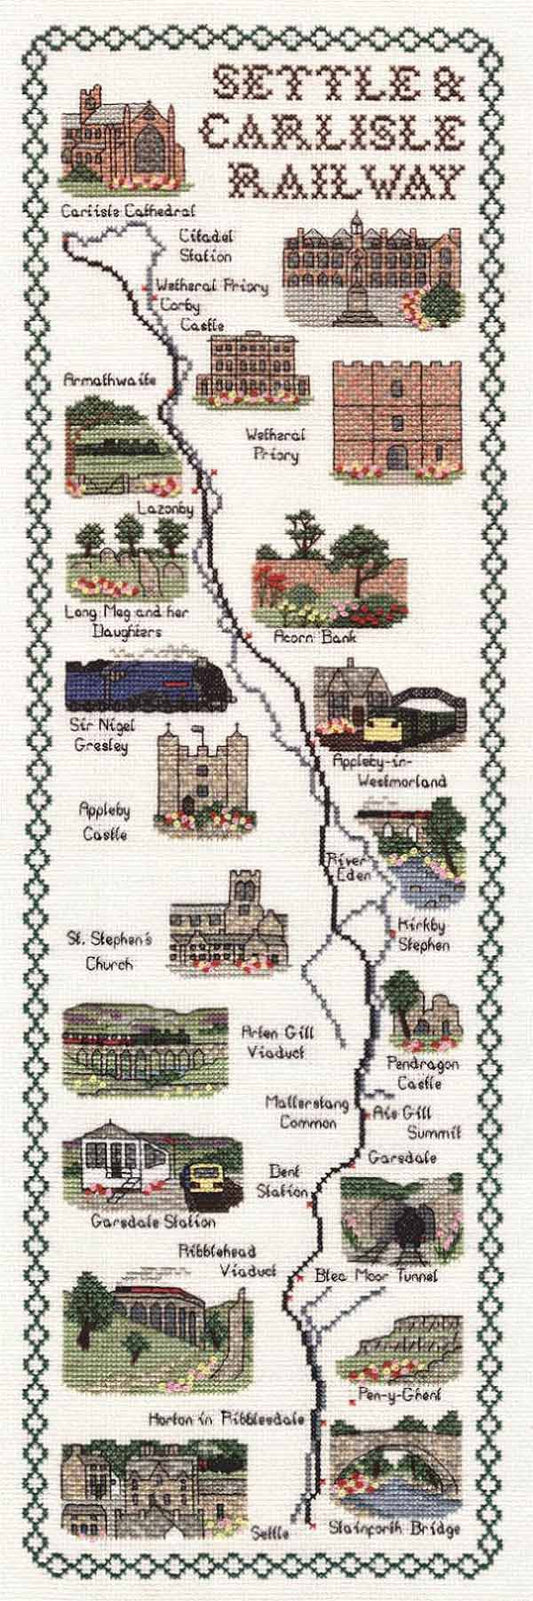 Settle and Carlisle Railway Map Cross Stitch Kit by Classic Embroidery